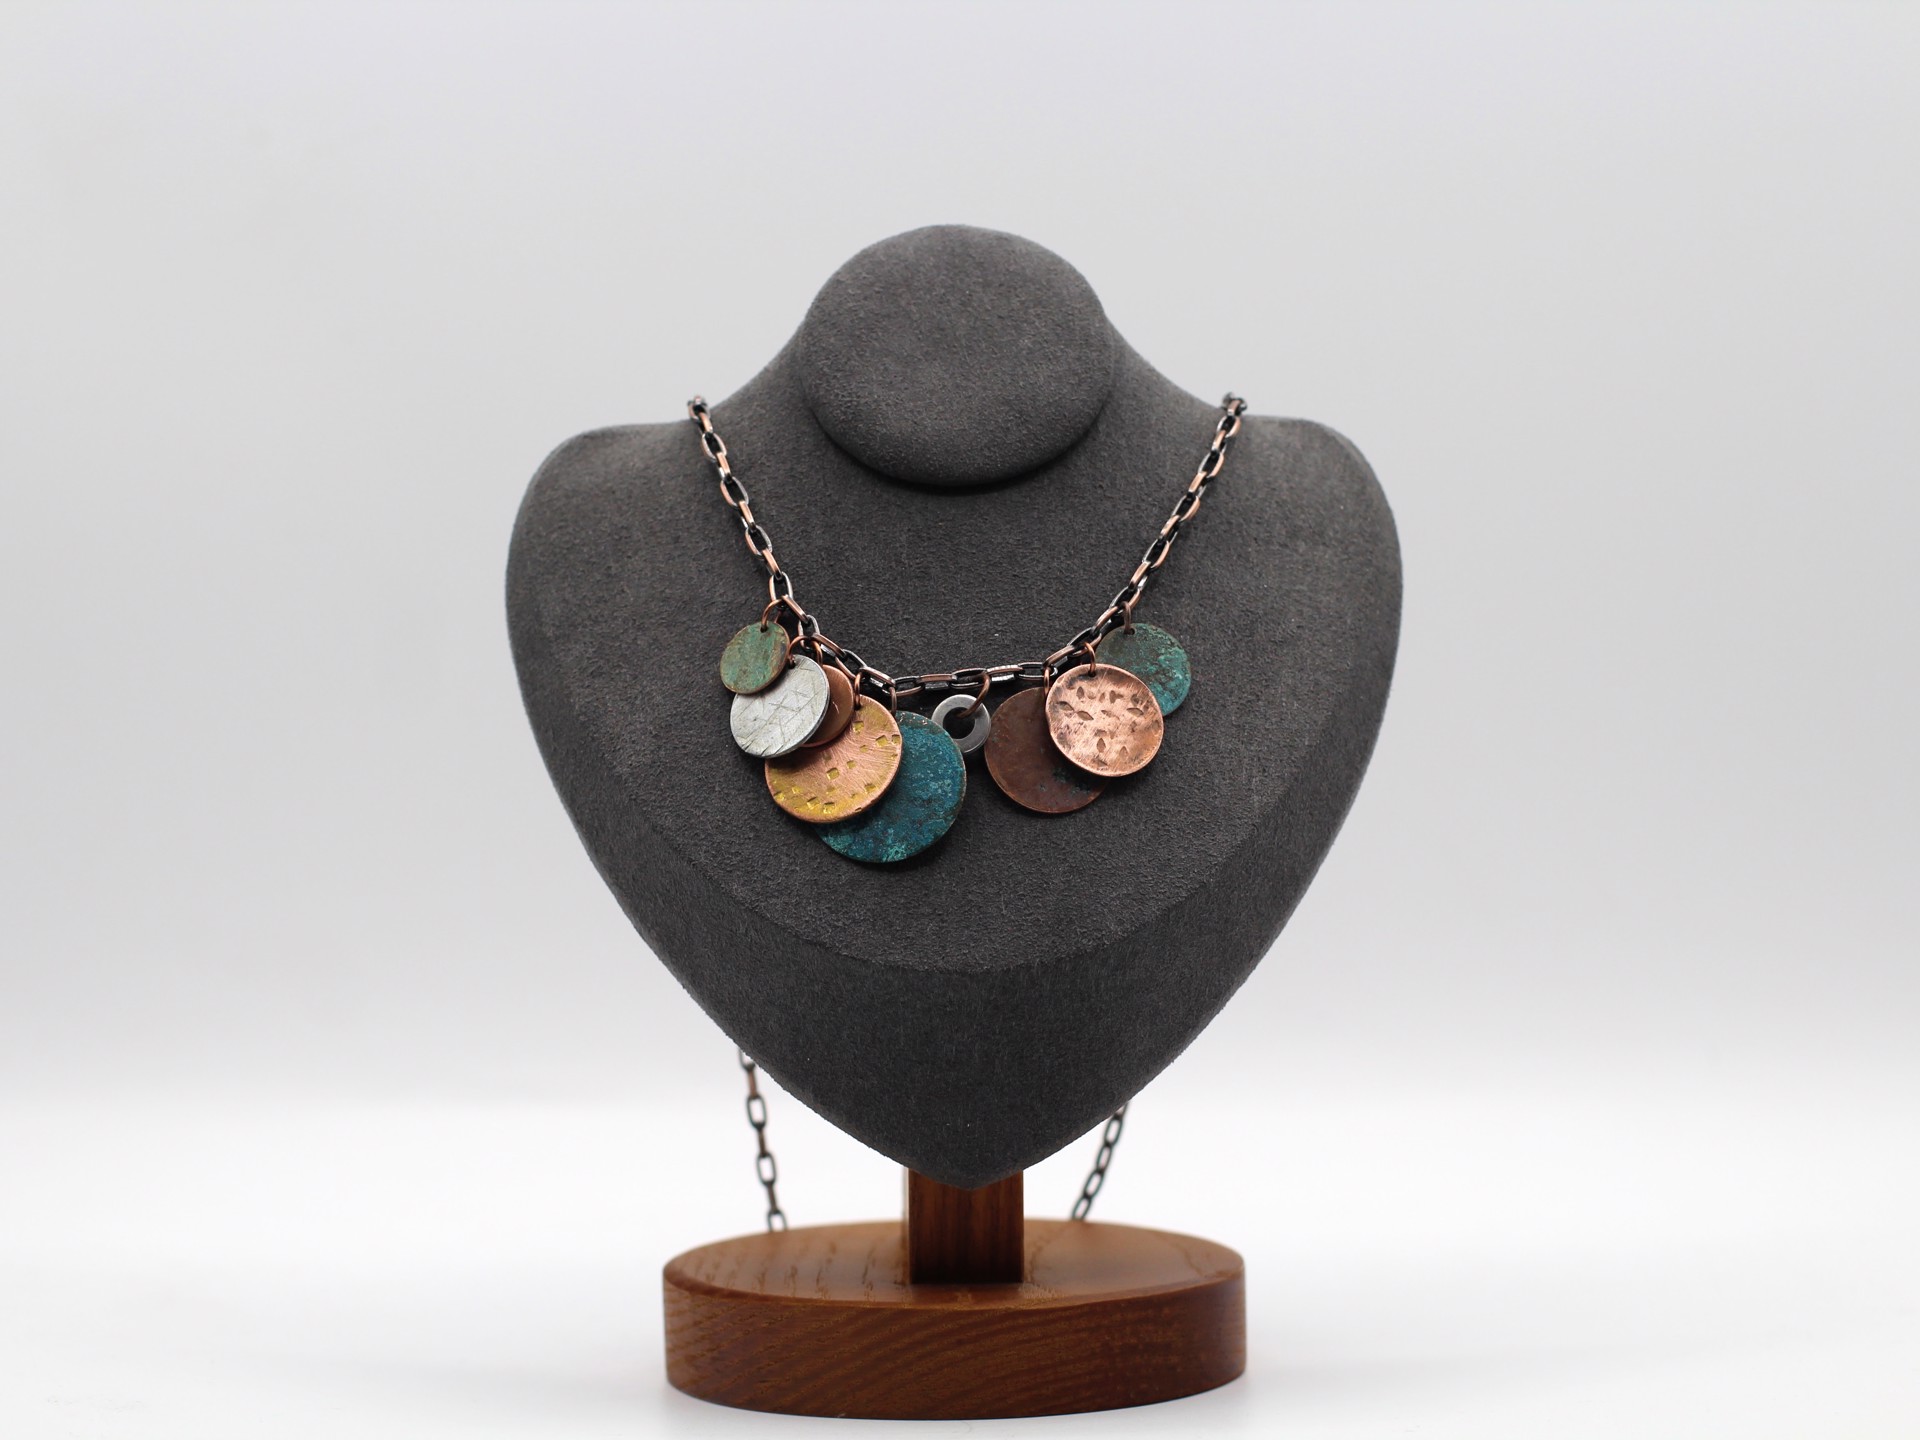 Aged Copper Necklace by Kay Langland